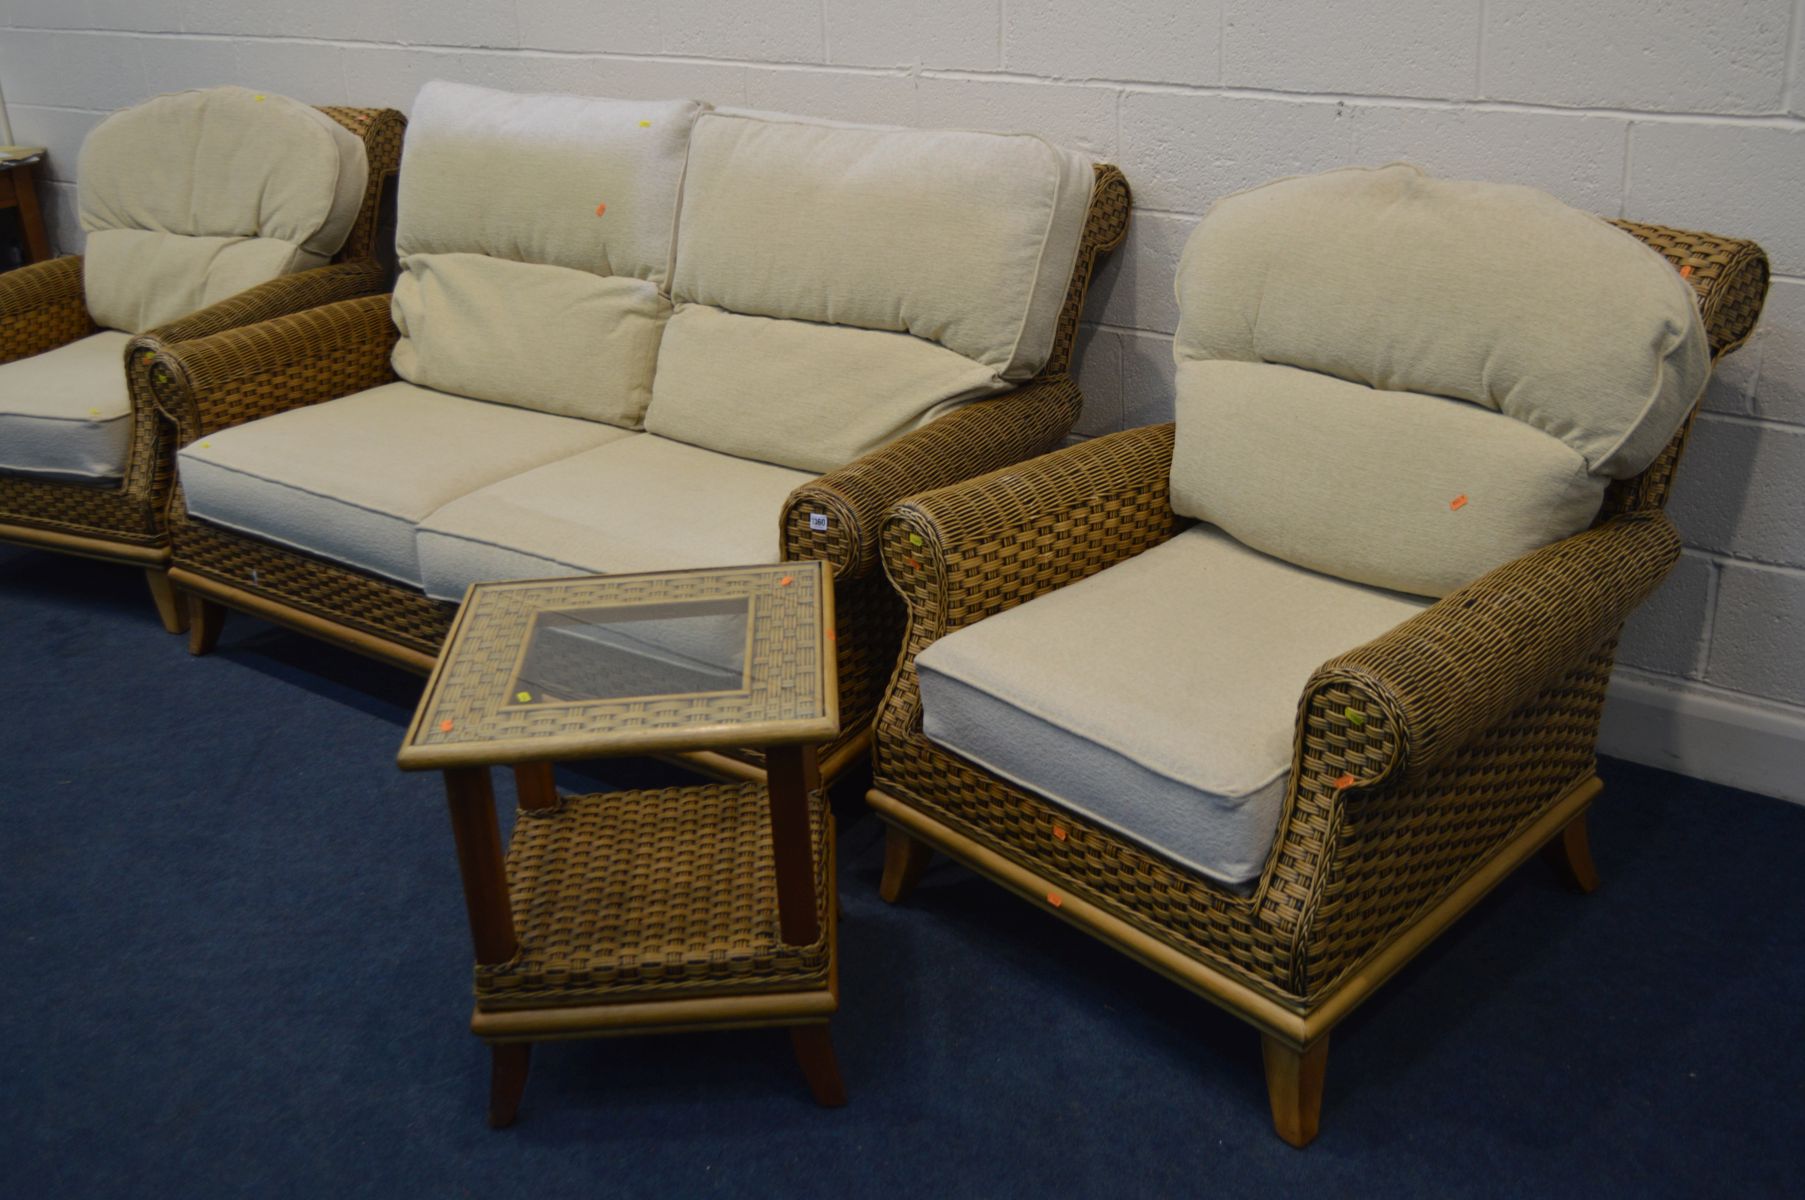 A FOUR PIECE CONSERVATORY SUITE, cream cushions, comprising a two seat settee, two armchairs and - Image 3 of 4